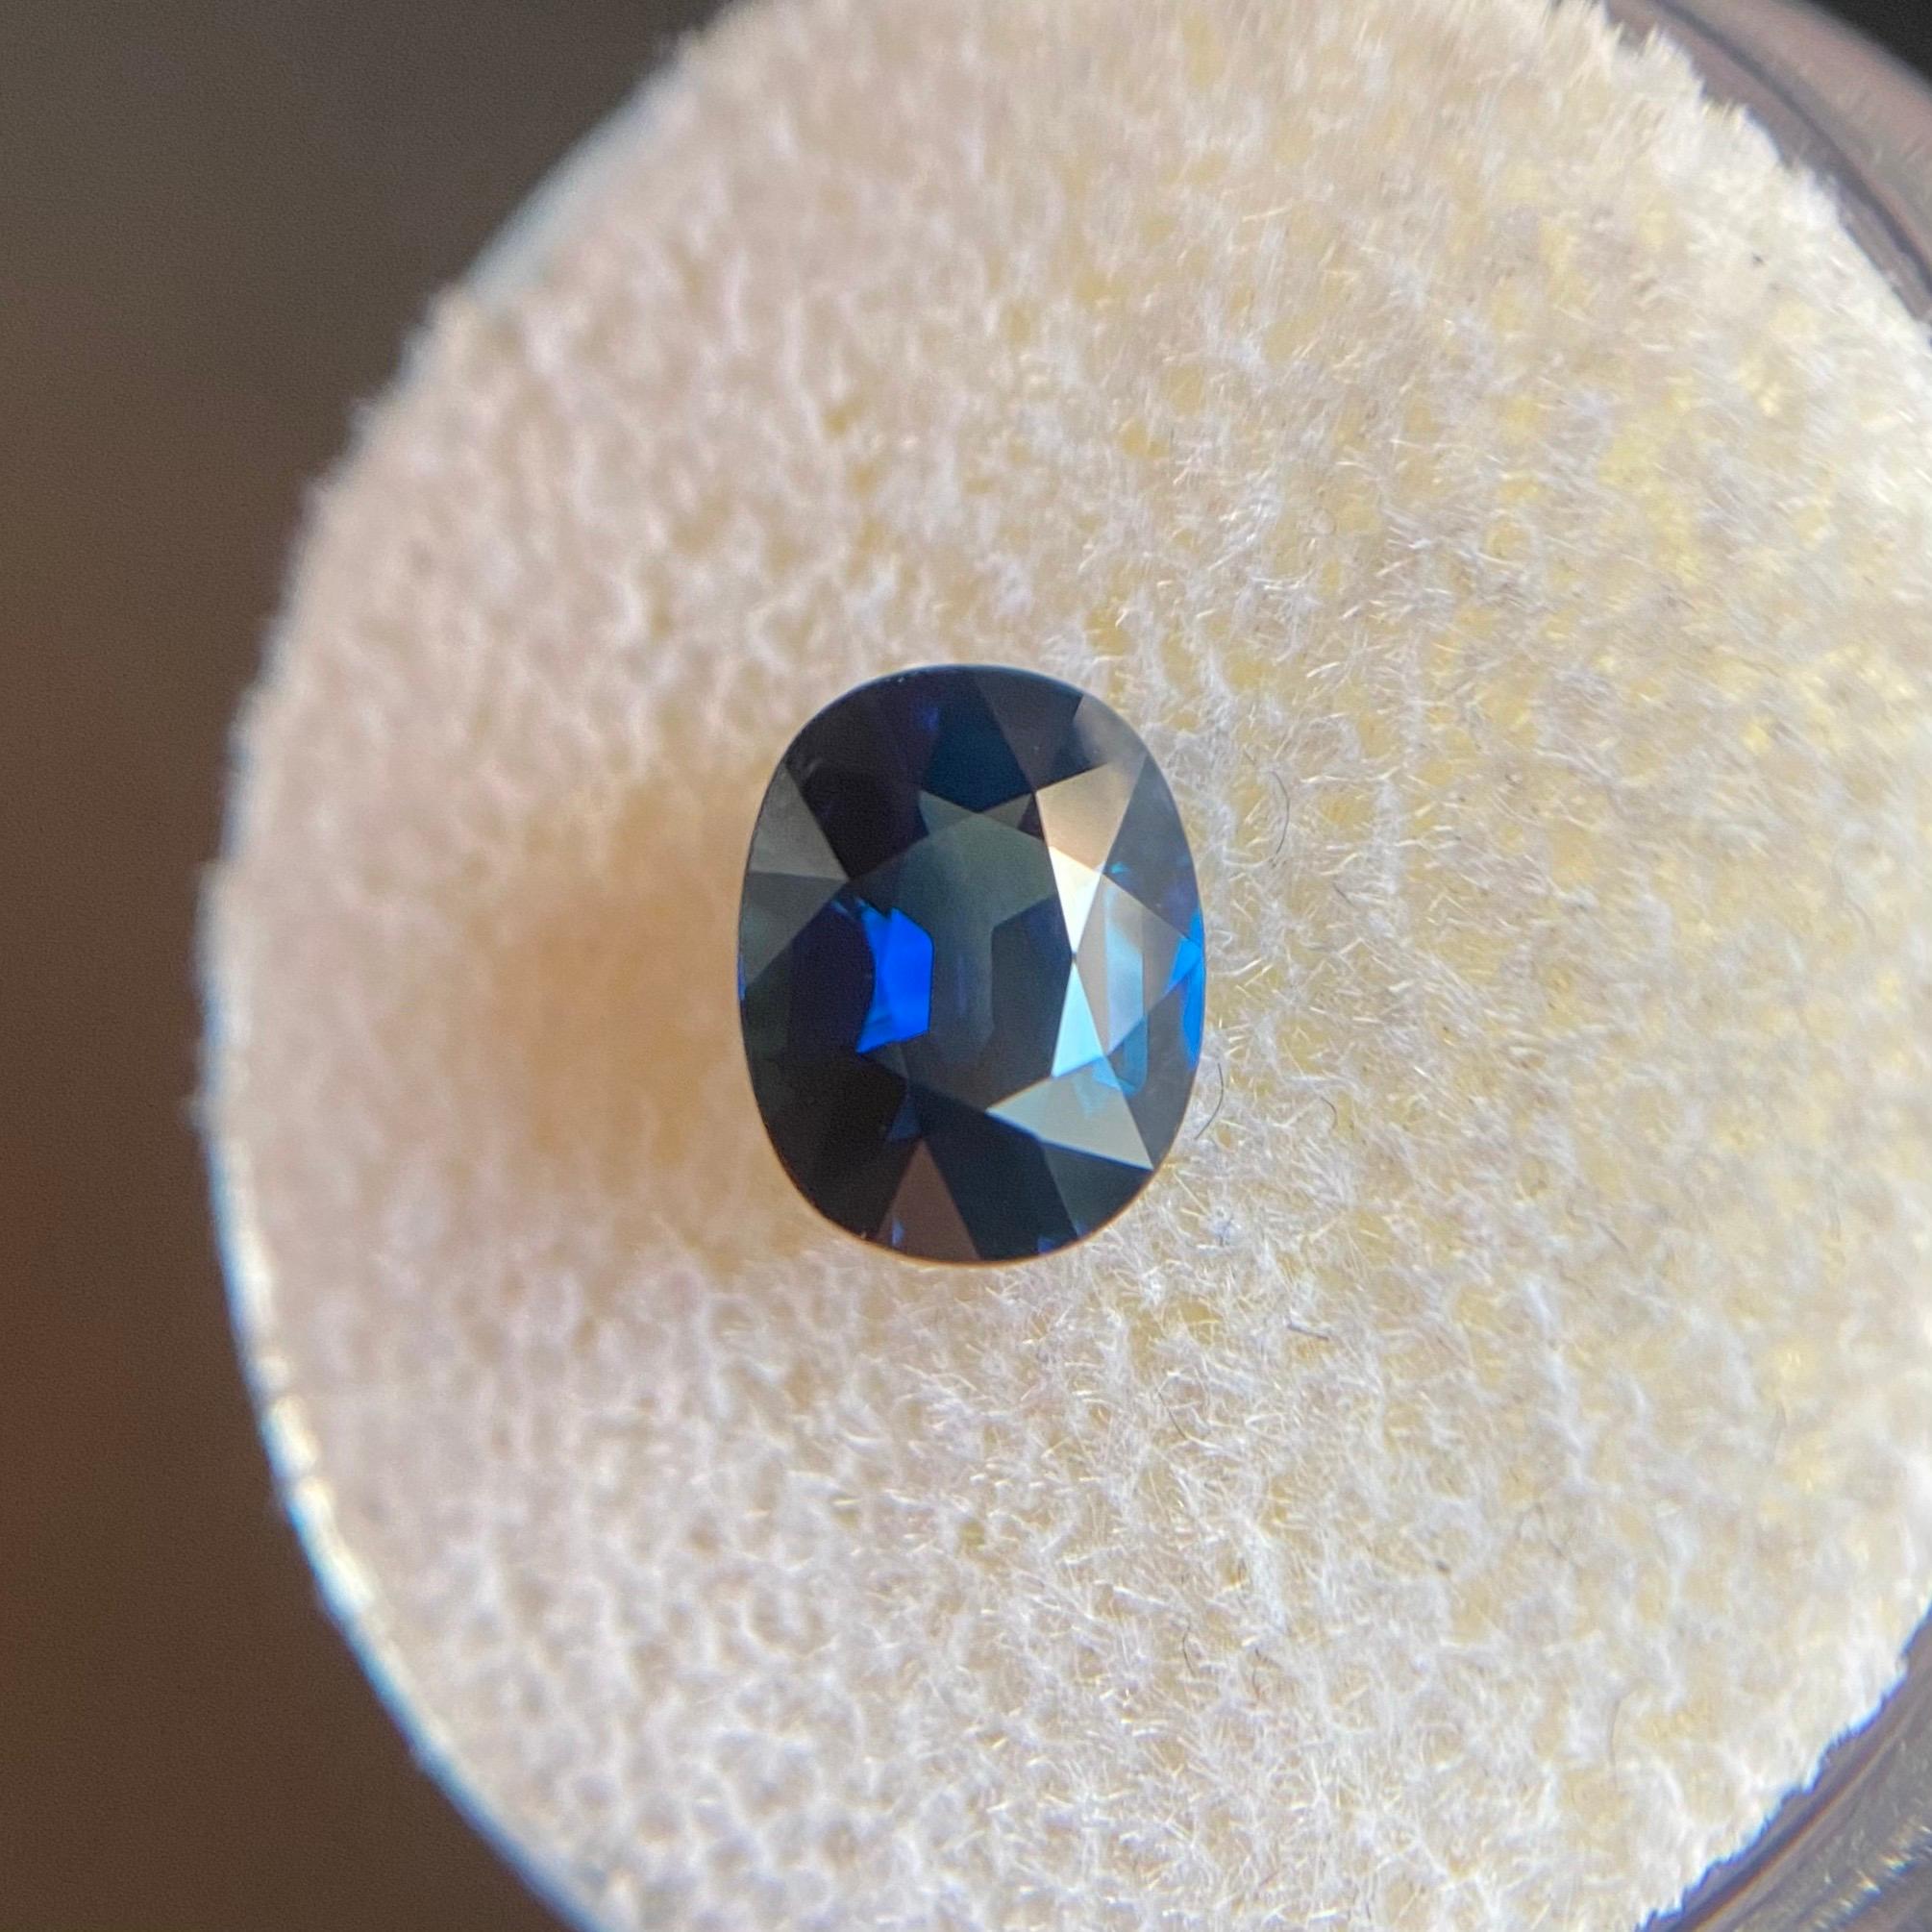 Fine Blue Untreated Sapphire Gemstone.

Fine quality unheated sapphire with a beautiful bright blue colour.

Fully certified by GIA confirming stone as natural and untreated. Very rare for natural sapphires.

1.36 Carat with excellent clarity, a